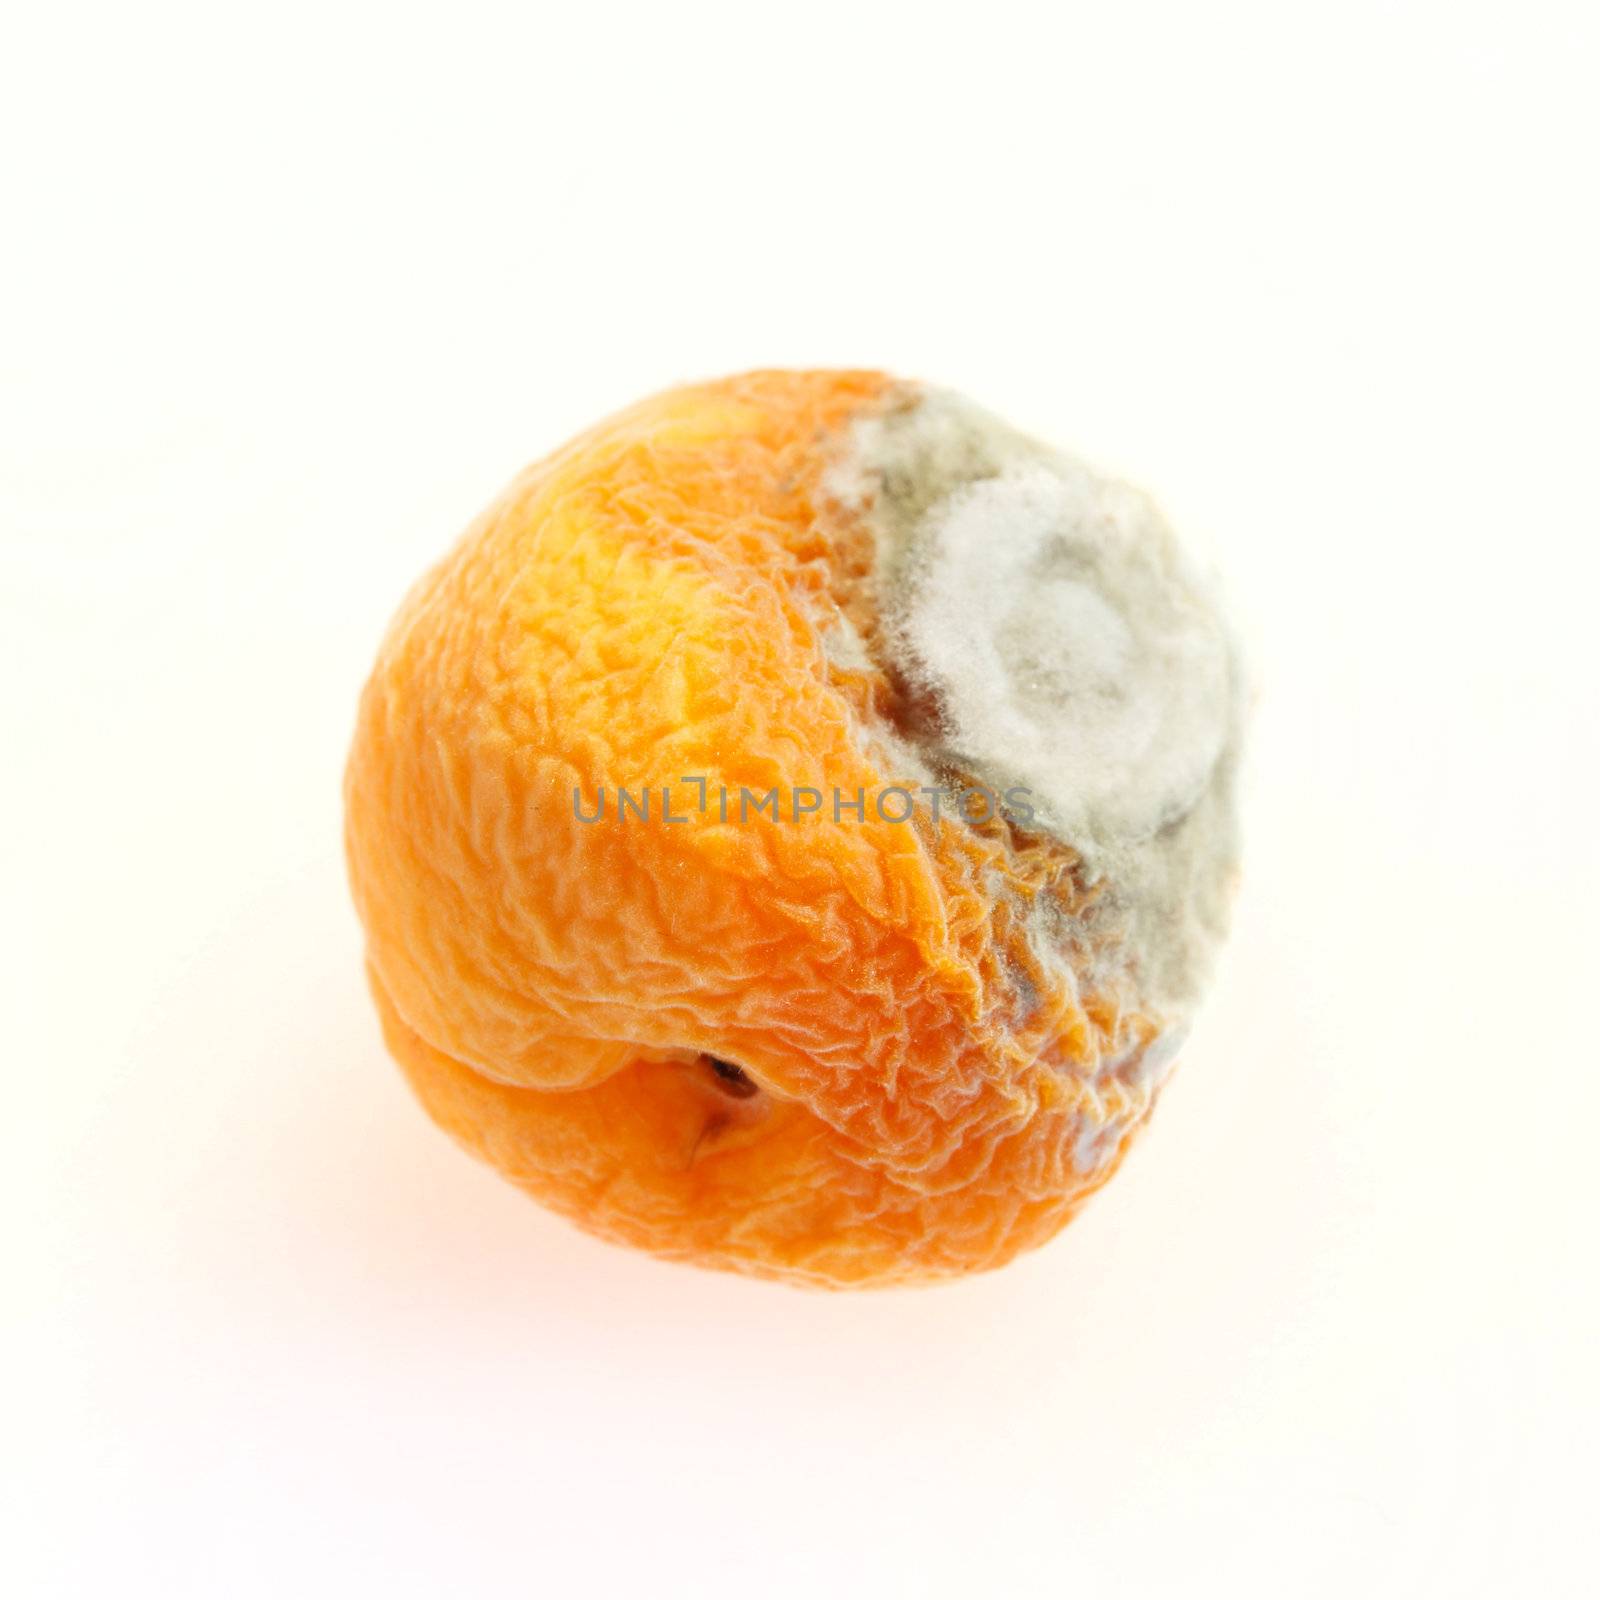 mould on peach 